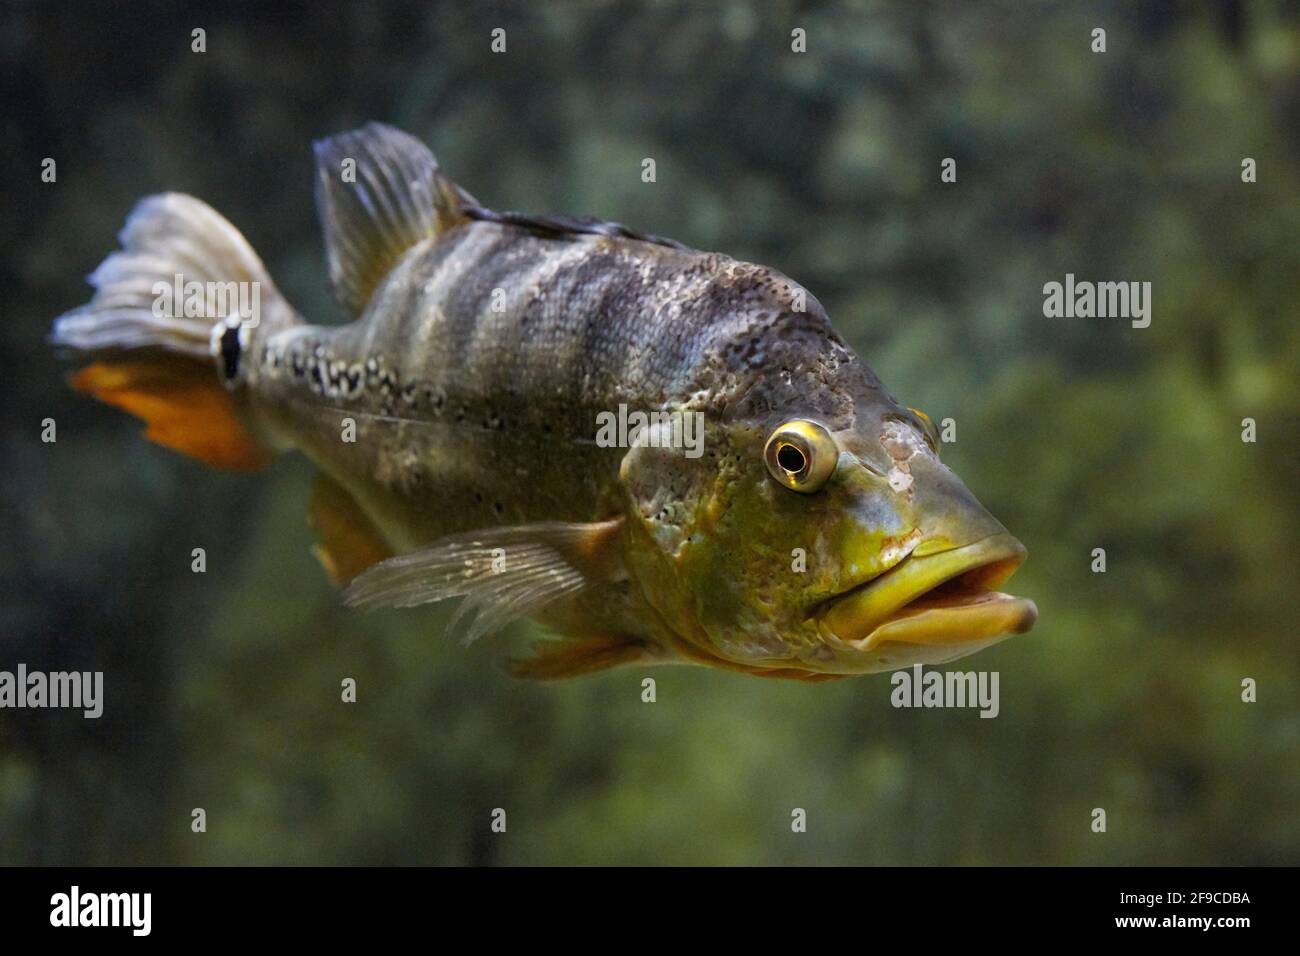 The butterfly peacock bass (Cichla ocellaris) swims in aquarium. Stock Photo